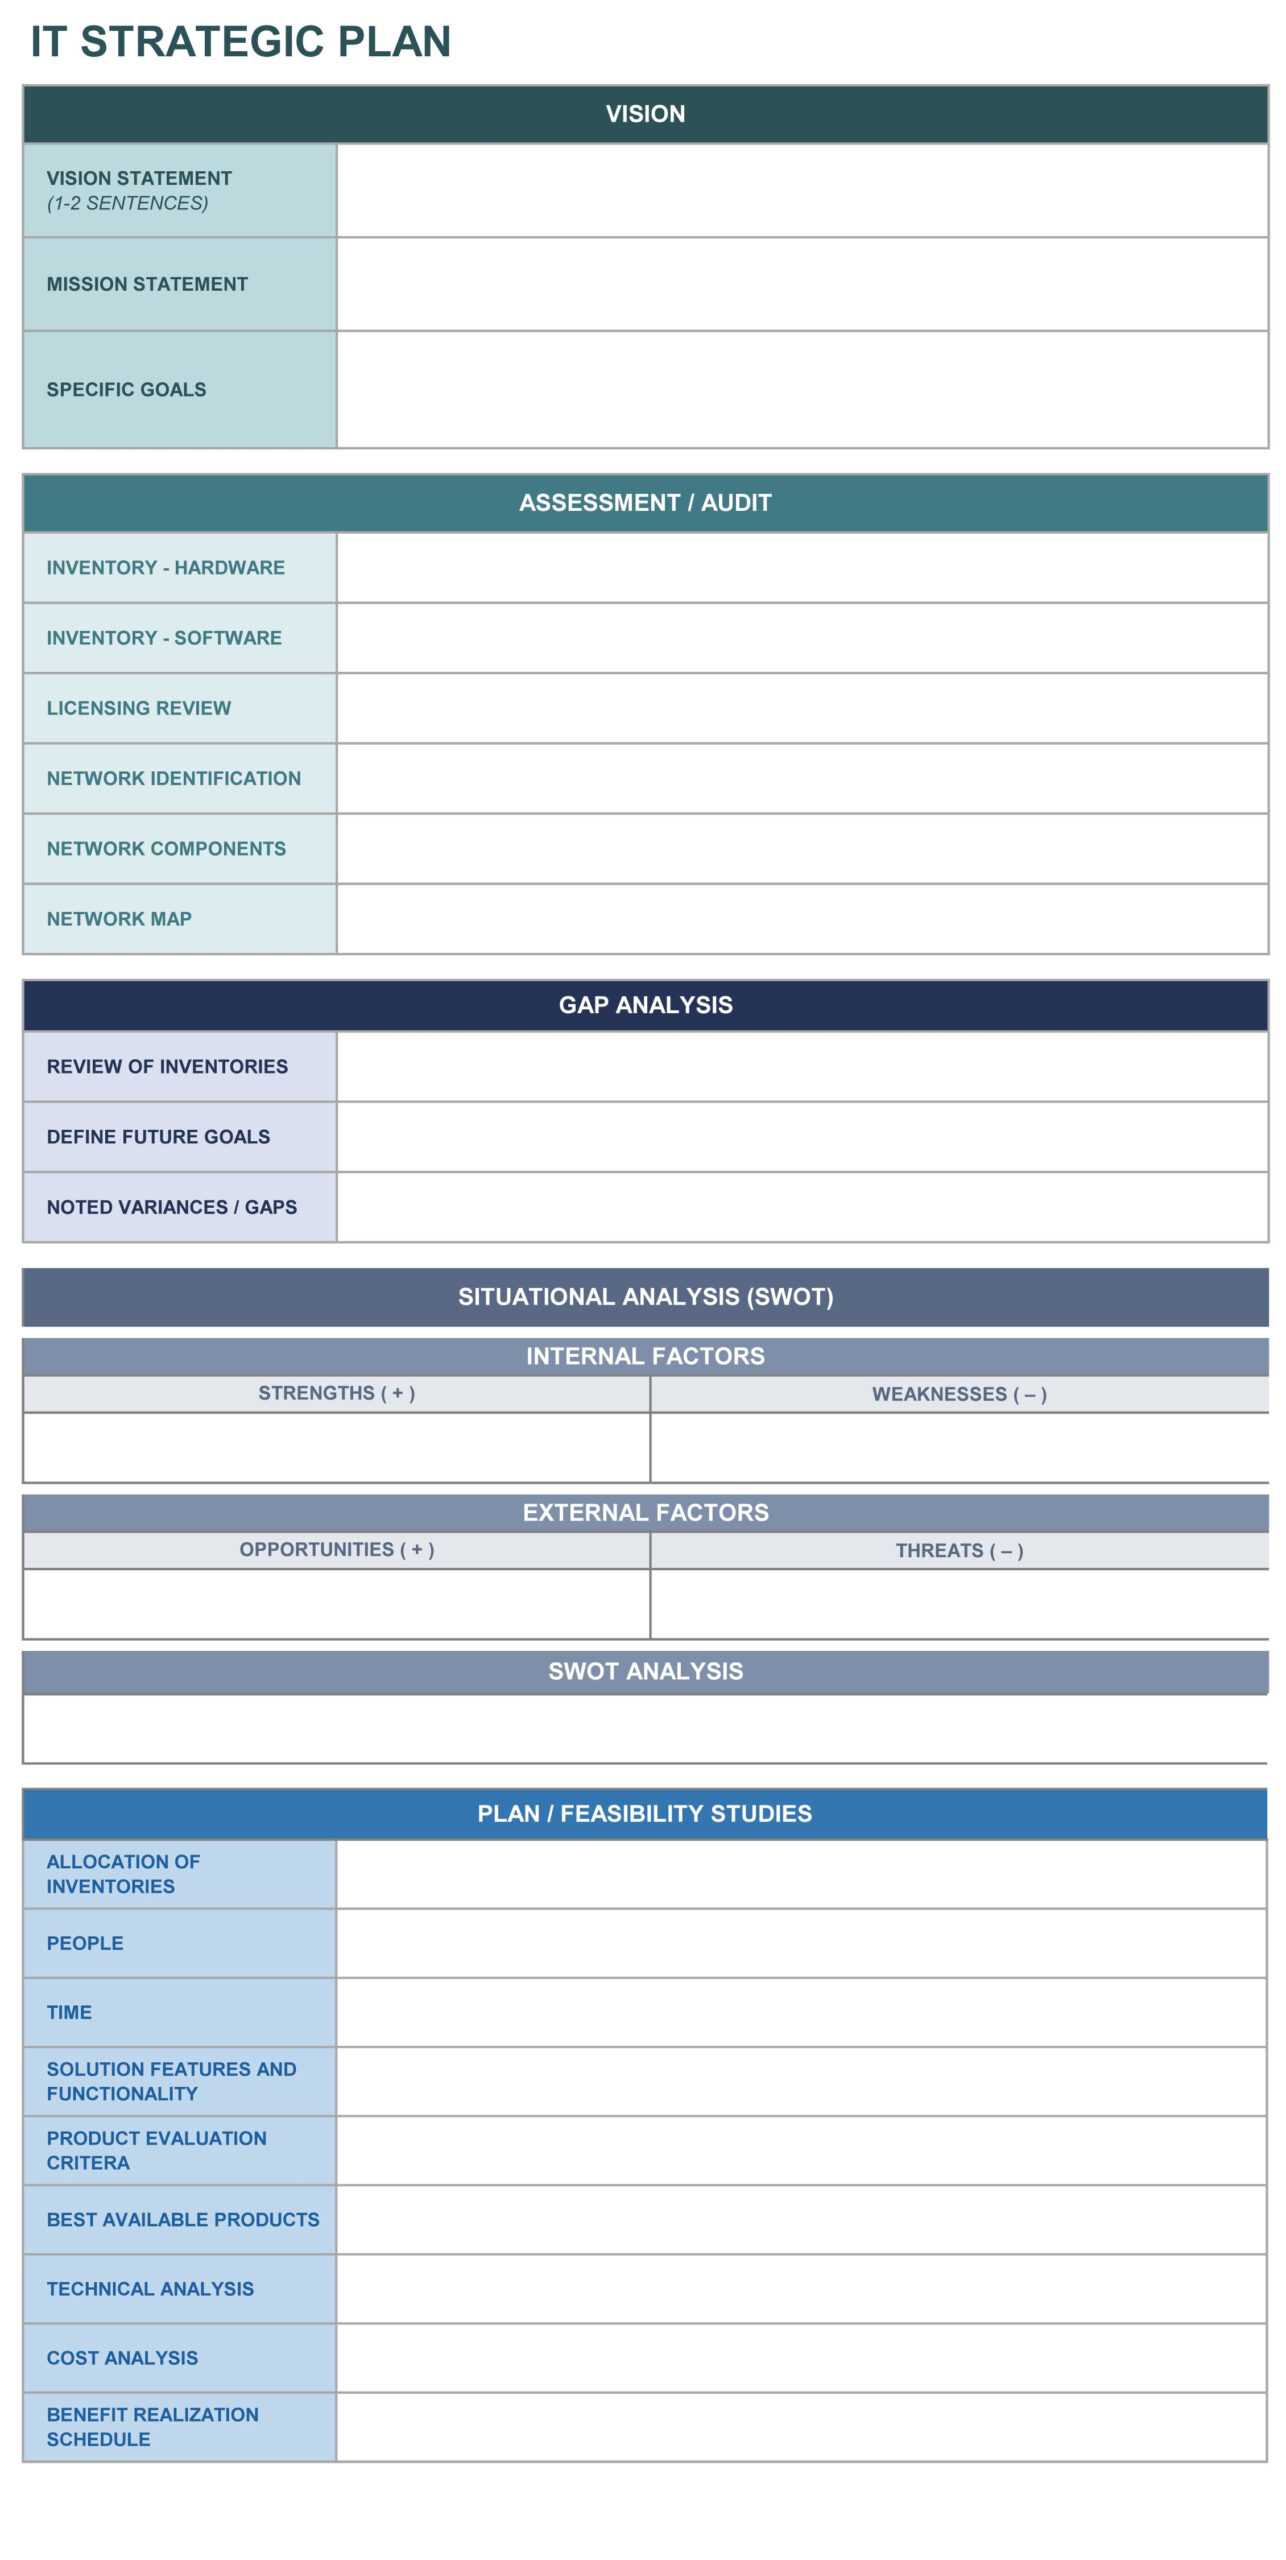 It Strategic Plan Excel Template | Strategic Planning Within Gap Analysis Report Template Free